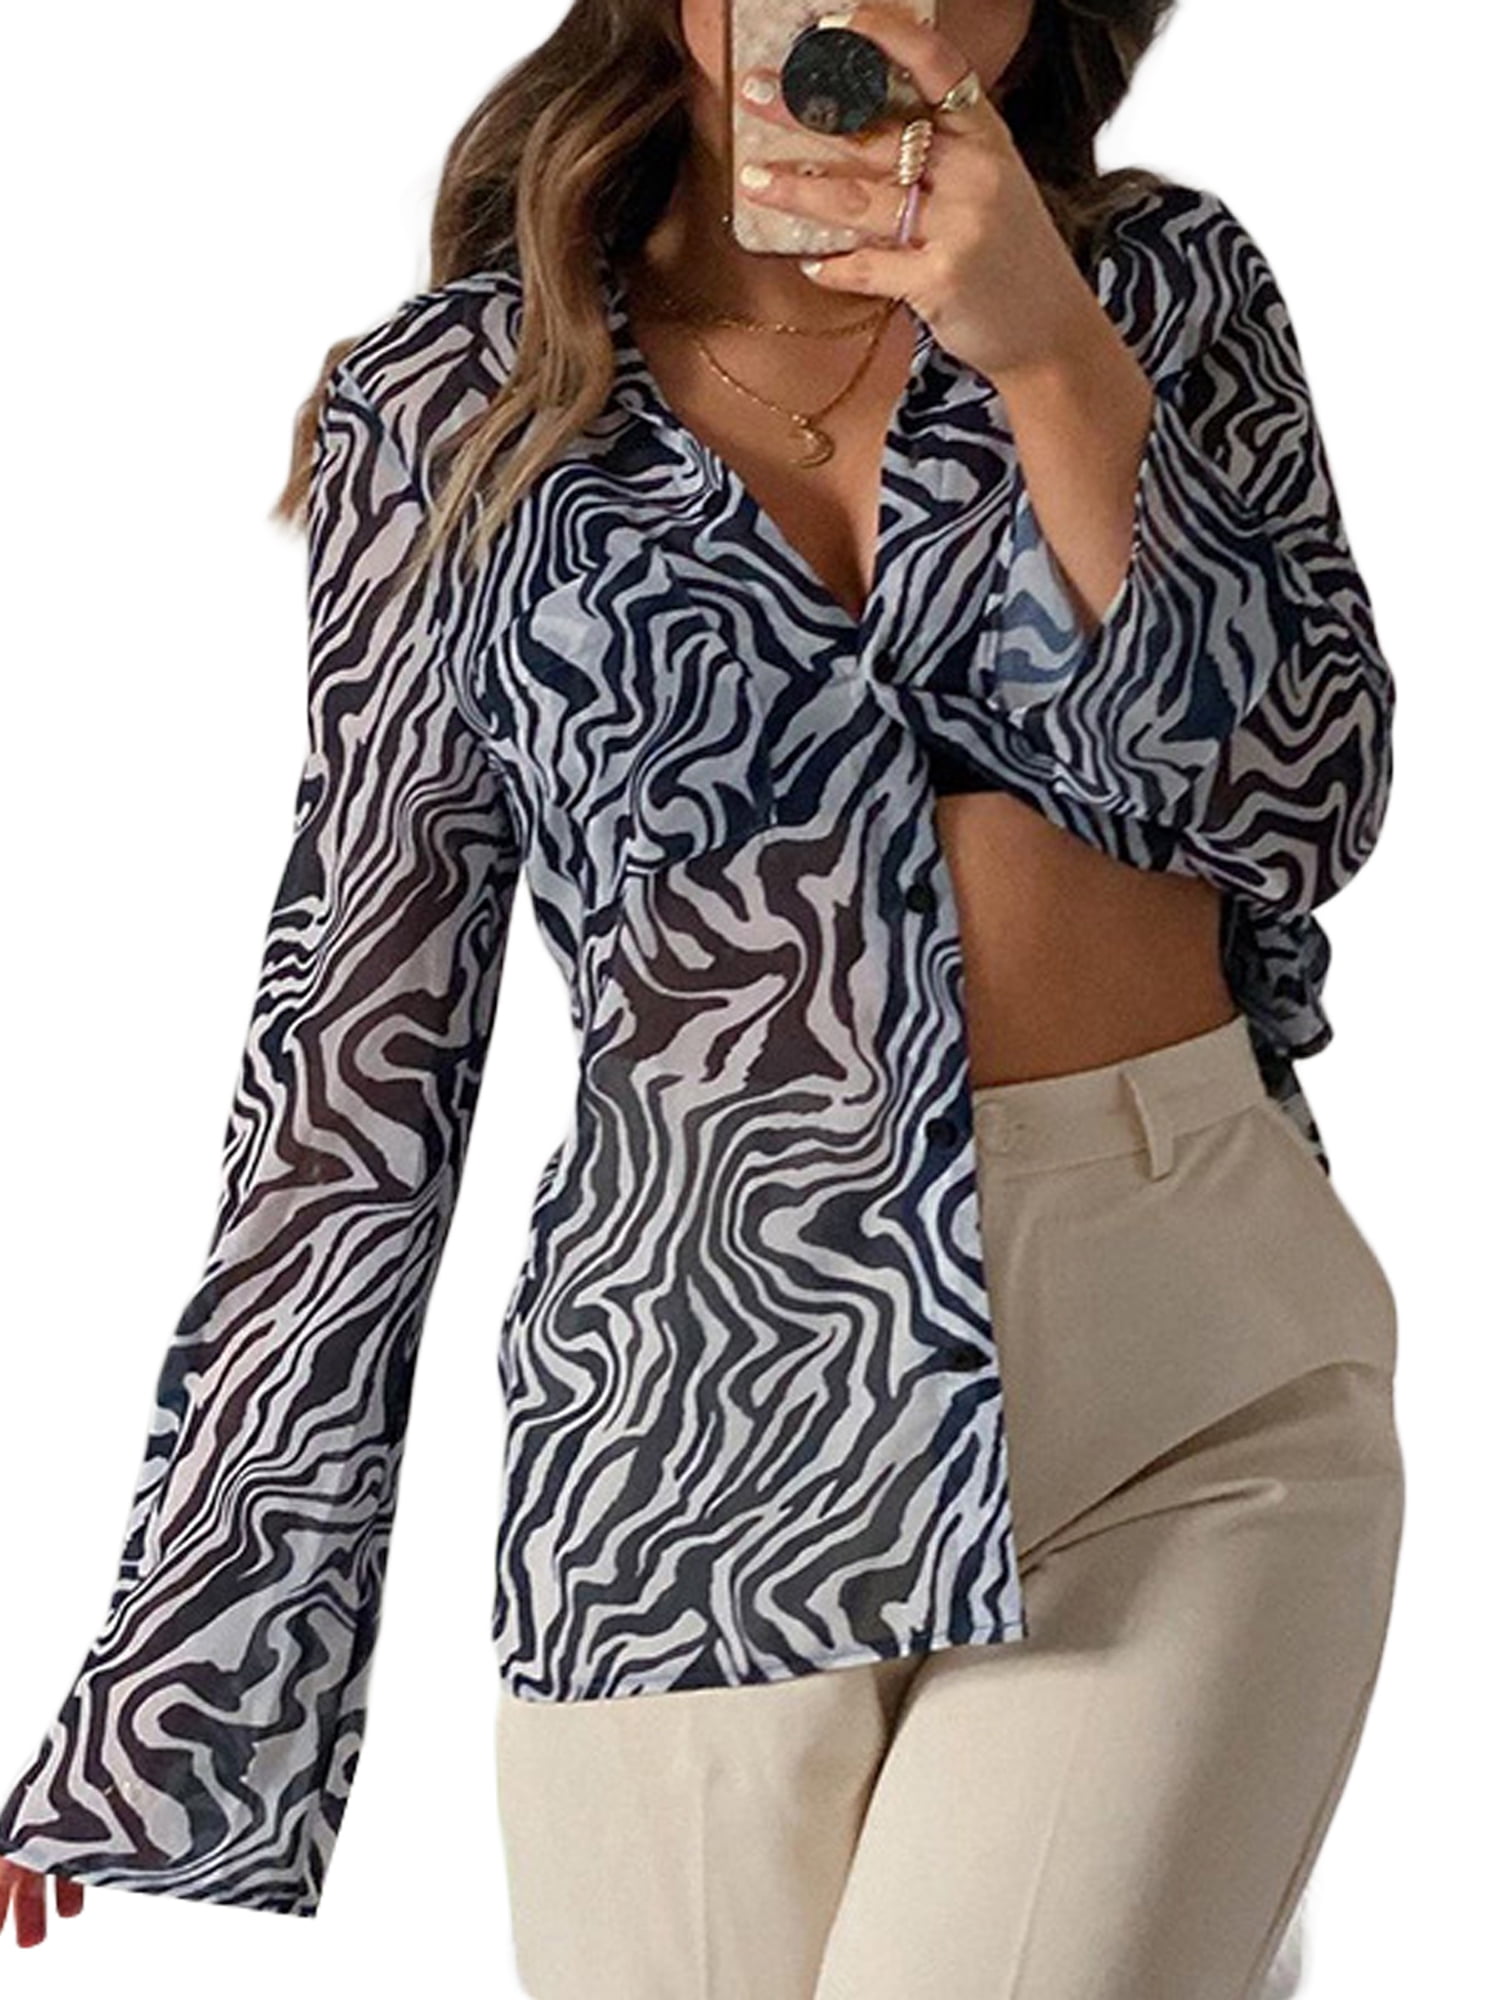 Women Long Sleeve Casual Blouse Ladies Zebra Striped Printed Buttons Shirt Tops 